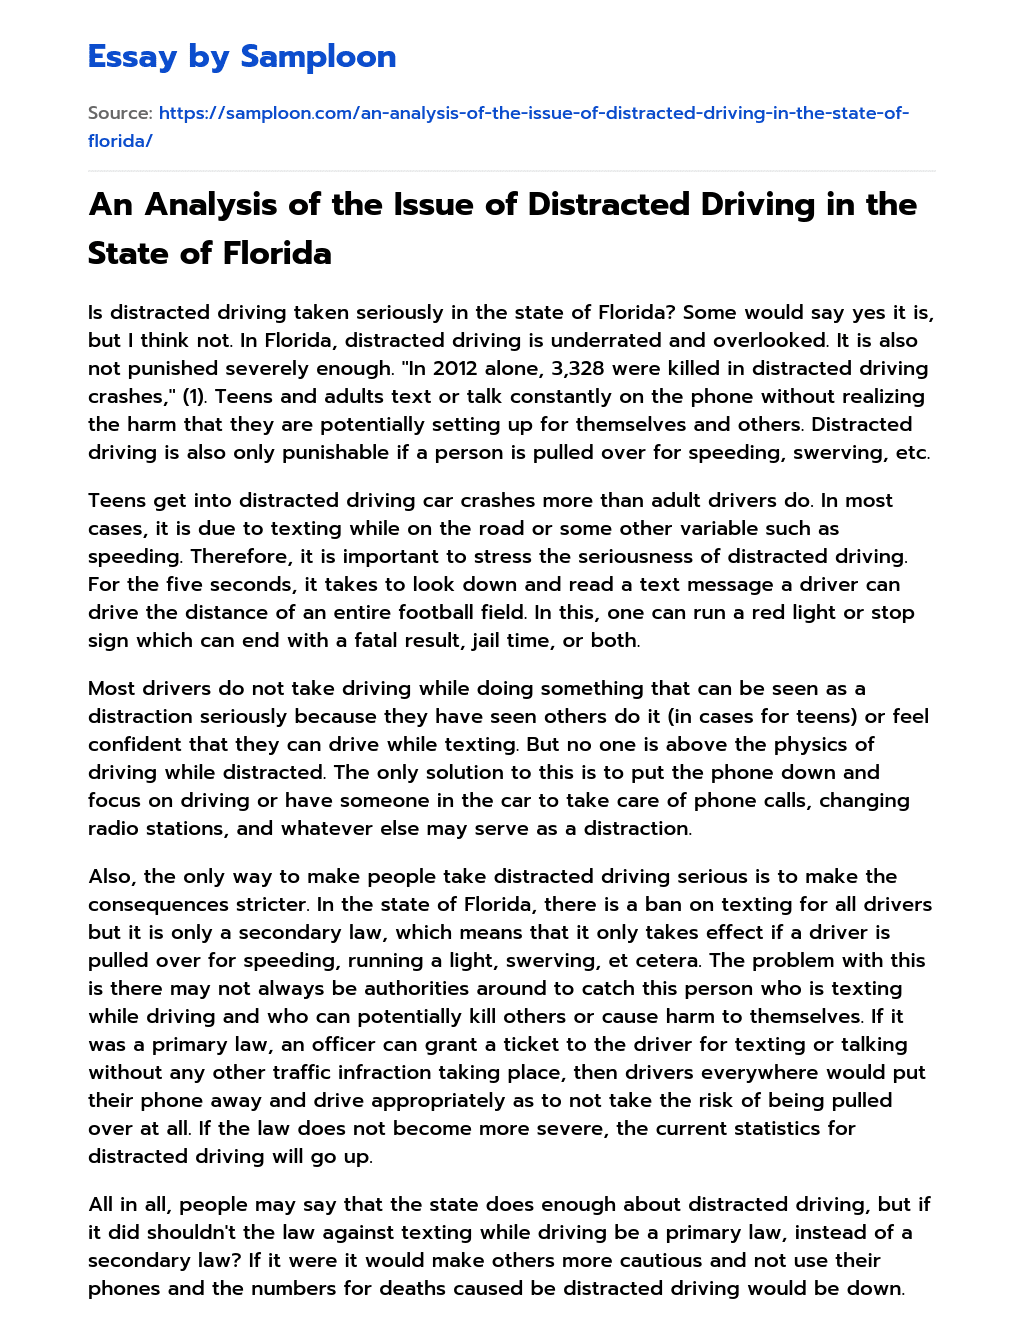 An Analysis of the Issue of Distracted Driving in the State of Florida essay